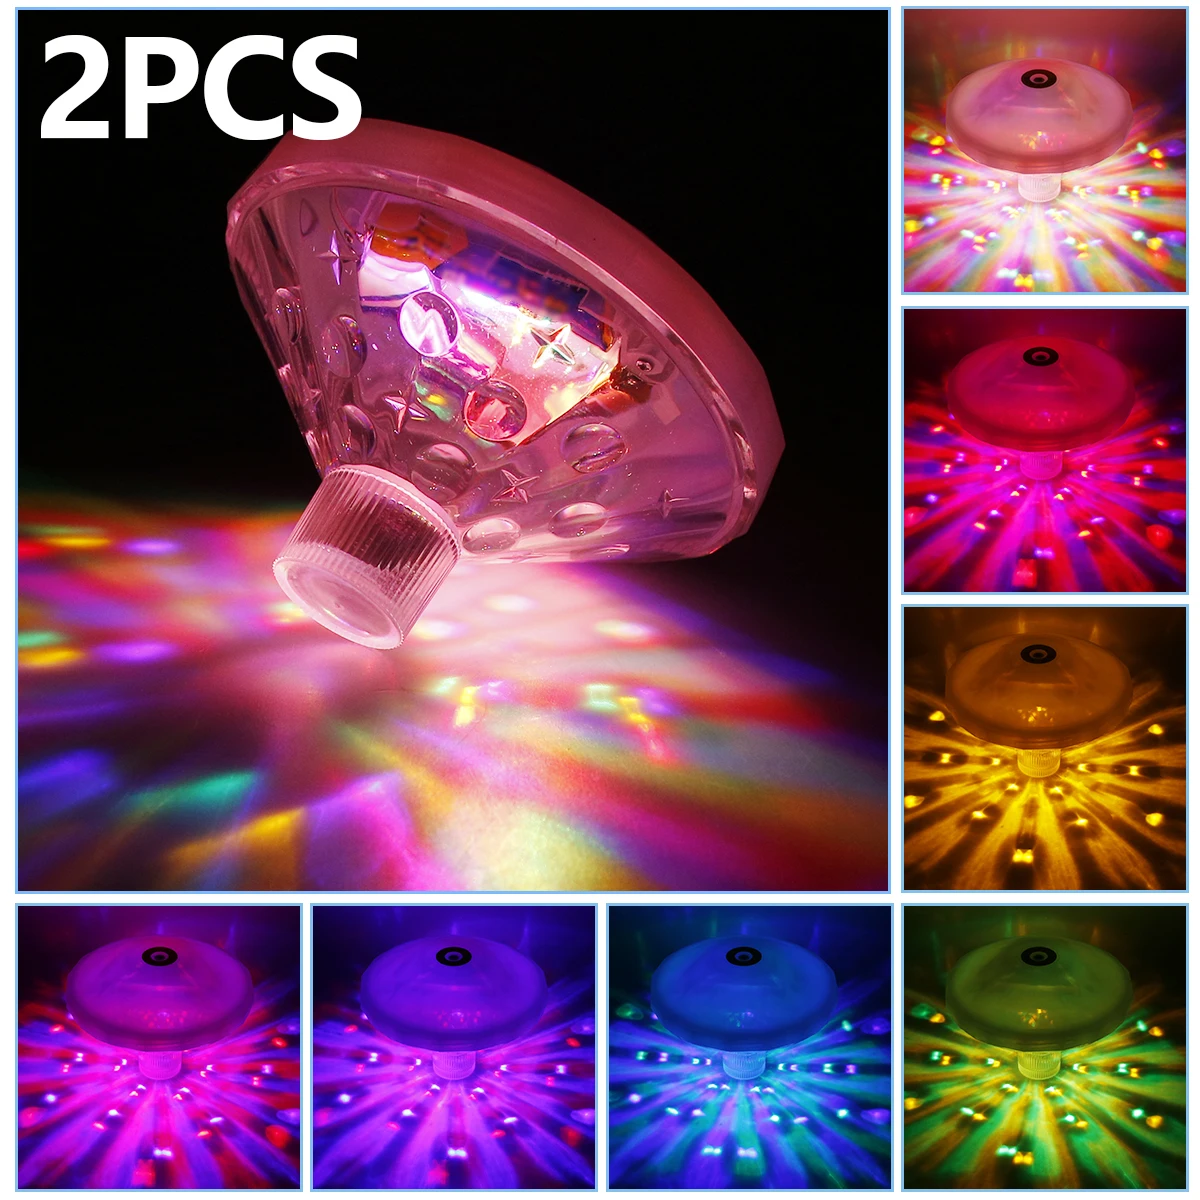 

2Pcs LED Pool Light IP67 Waterproof Disco Bath Light Battery Powered Floating Pool Lights with 8 Color Changing Modes Underwater